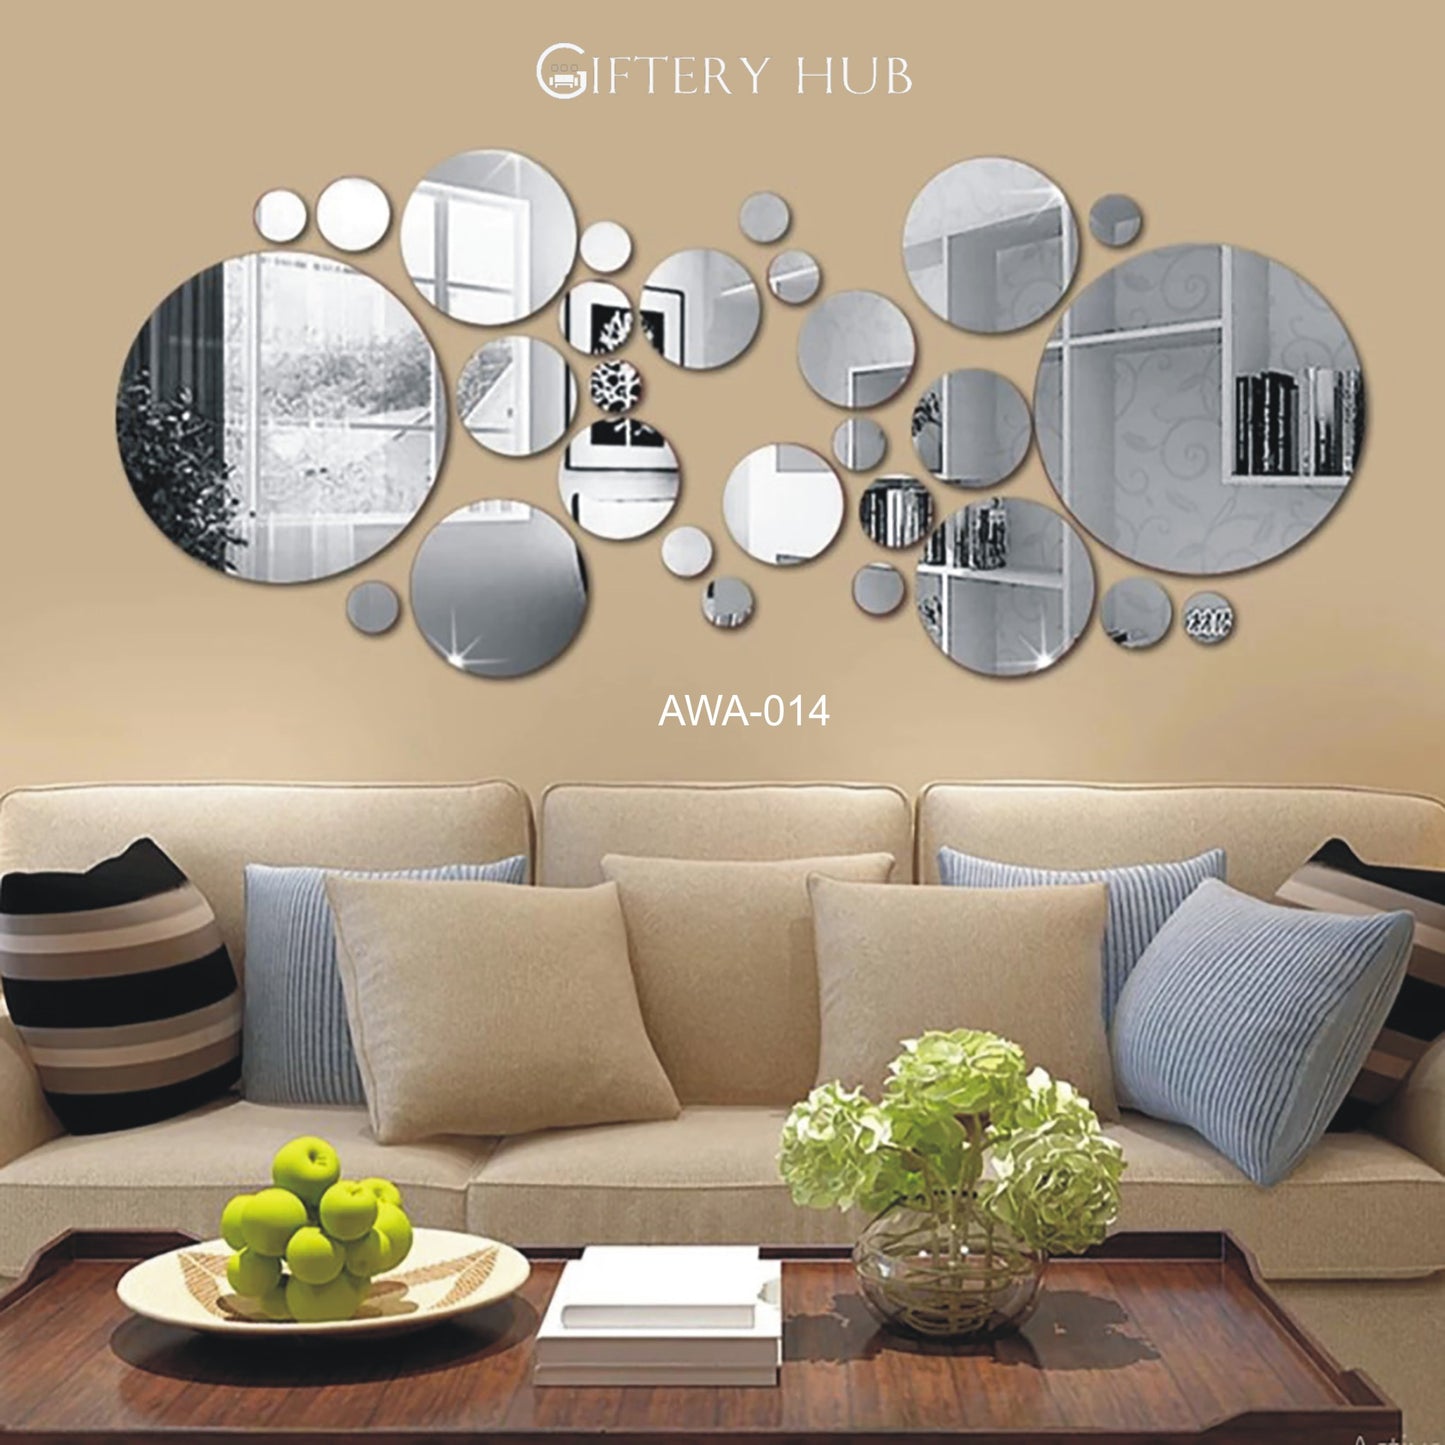 3D DIY Silver Circles Mirror Acrylic Wall Stickers for Home and Office Decor - AWA-014